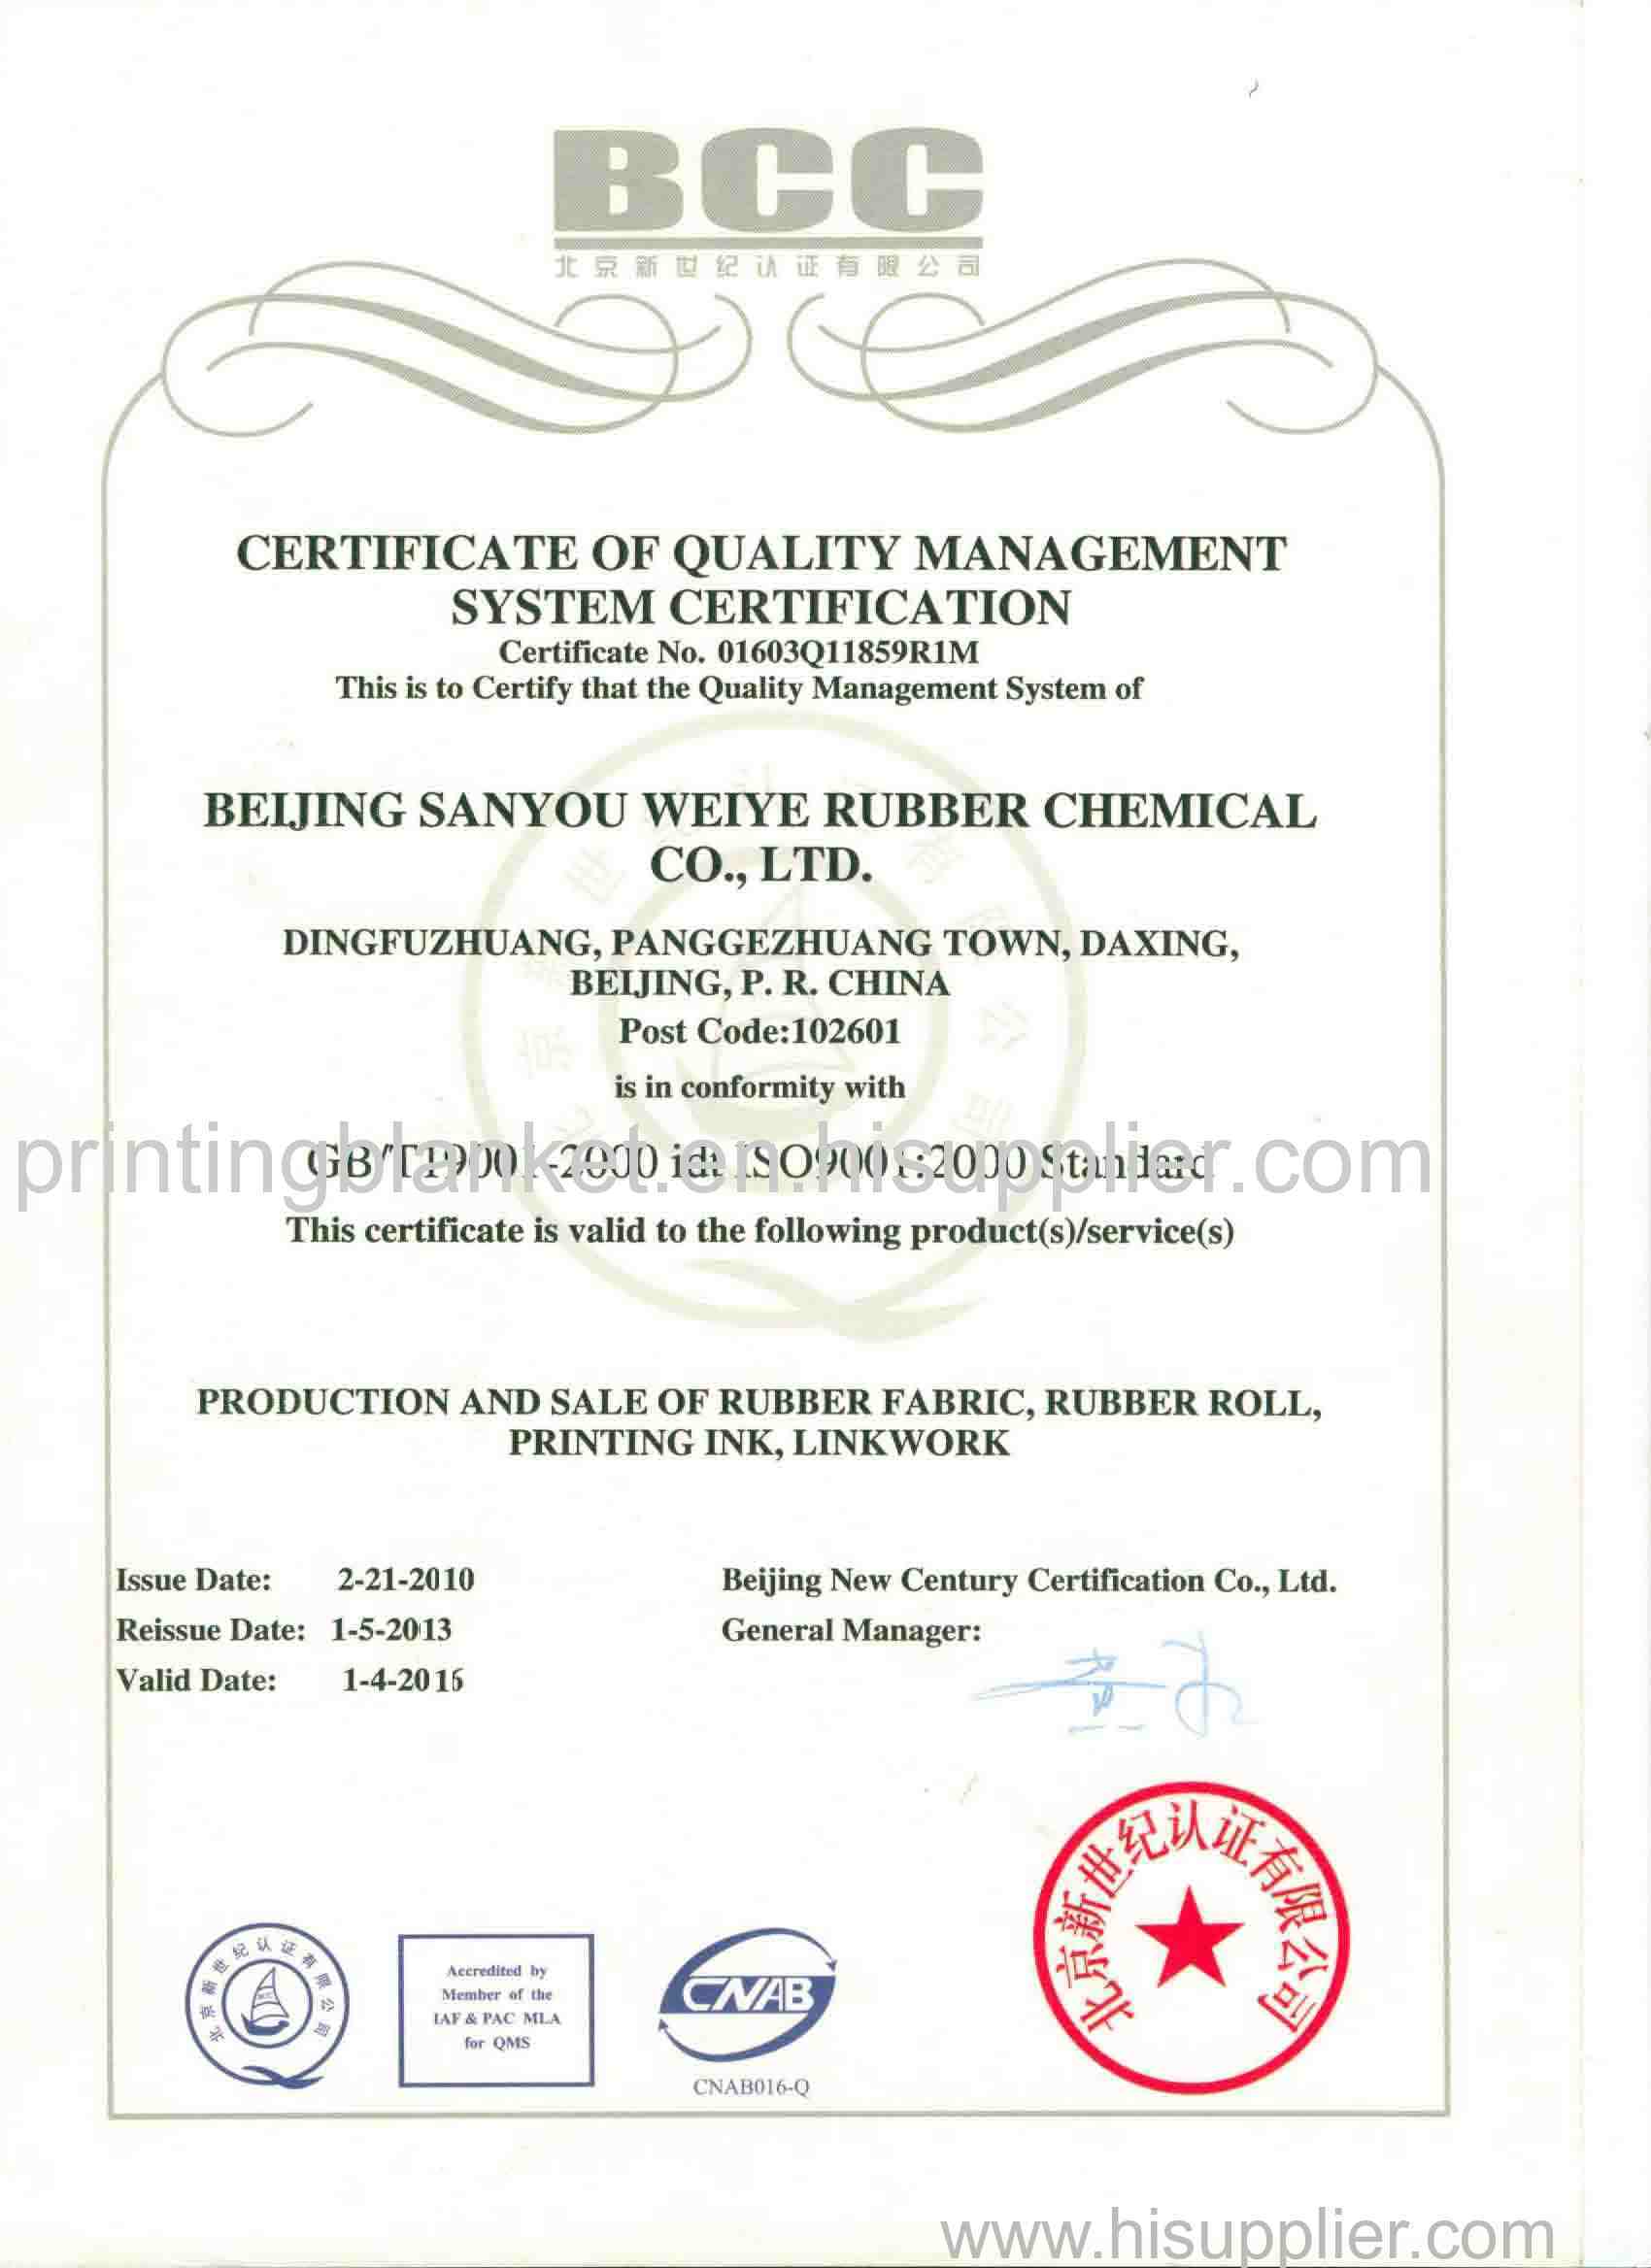 ISO9002